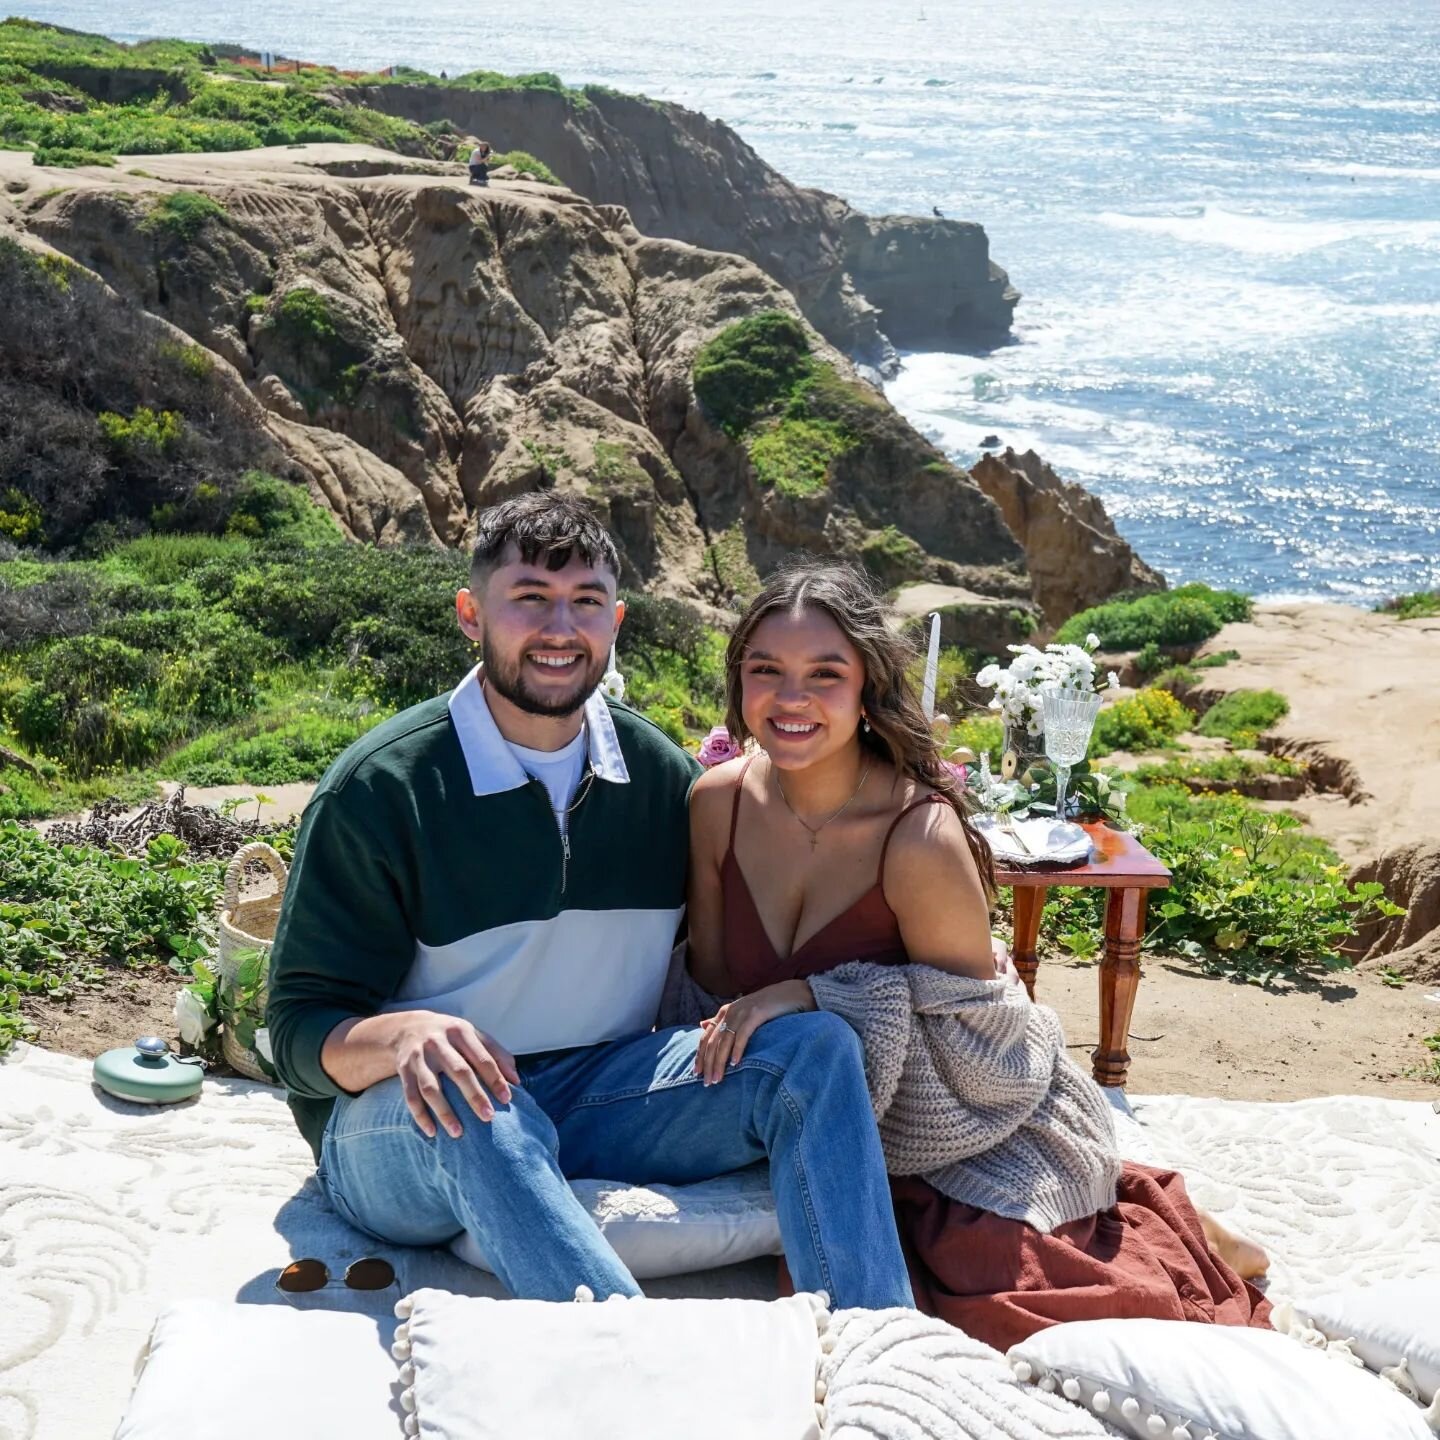 Picnic, proposal, and photoshoot with the most epic views around 😍 Sunset Cliffs is looking extra enchanting right now with all the greenery 🪄
.
.
.
.
#sunsetcliffsphotographer #proposalphotoshoot #mysdphoto #sunsetlover #sunsetcliffssandiego #natu